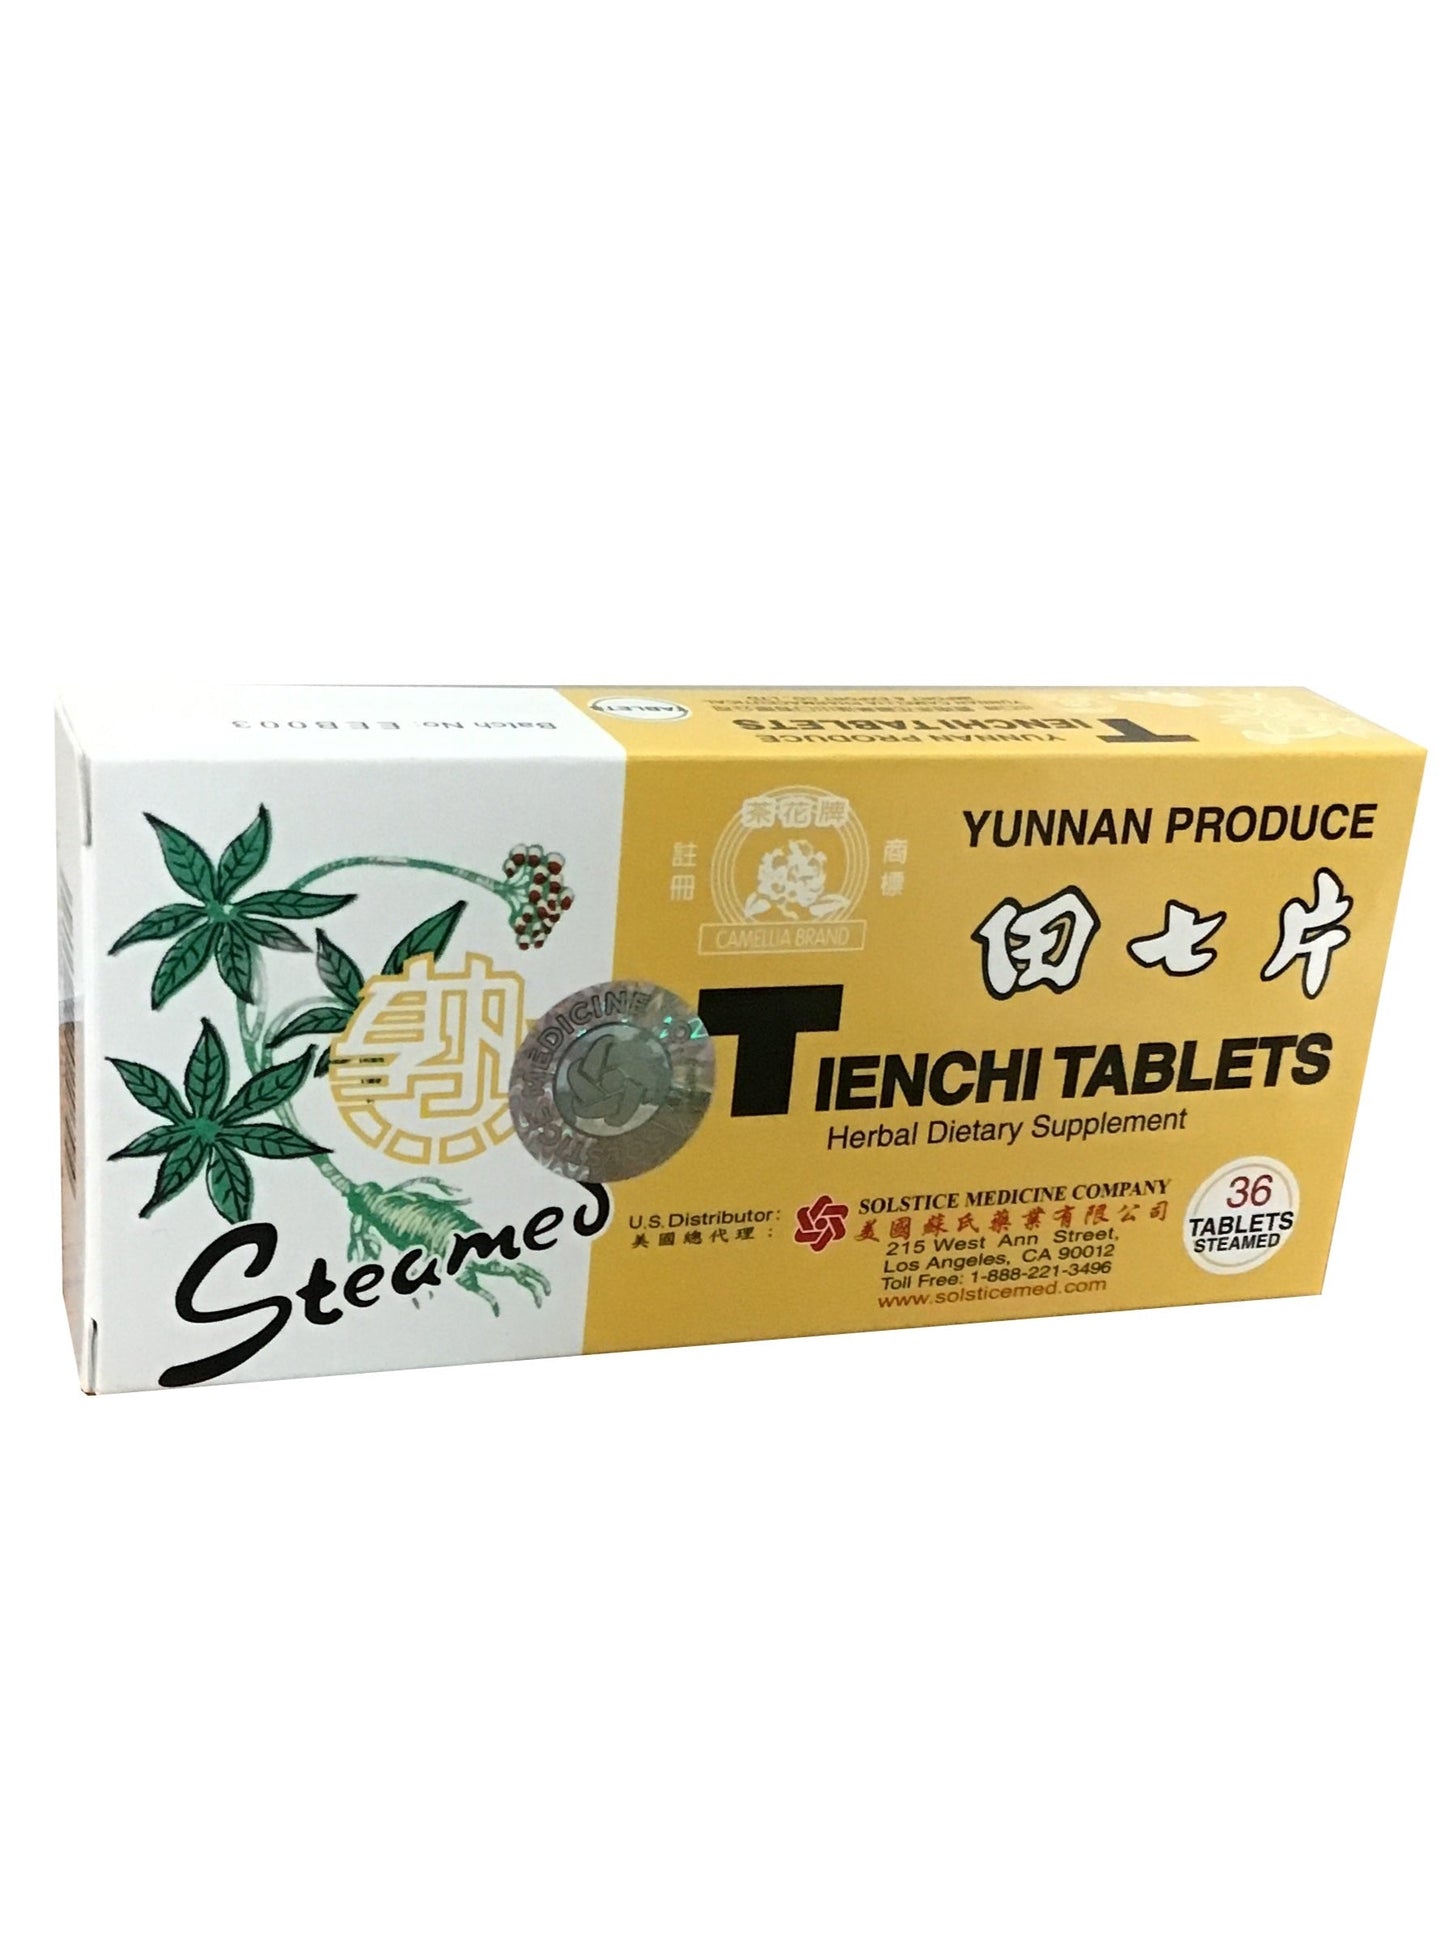 Steamed Tienchi Tablets (36 Pills) 菜花牌-田七片 (36片)